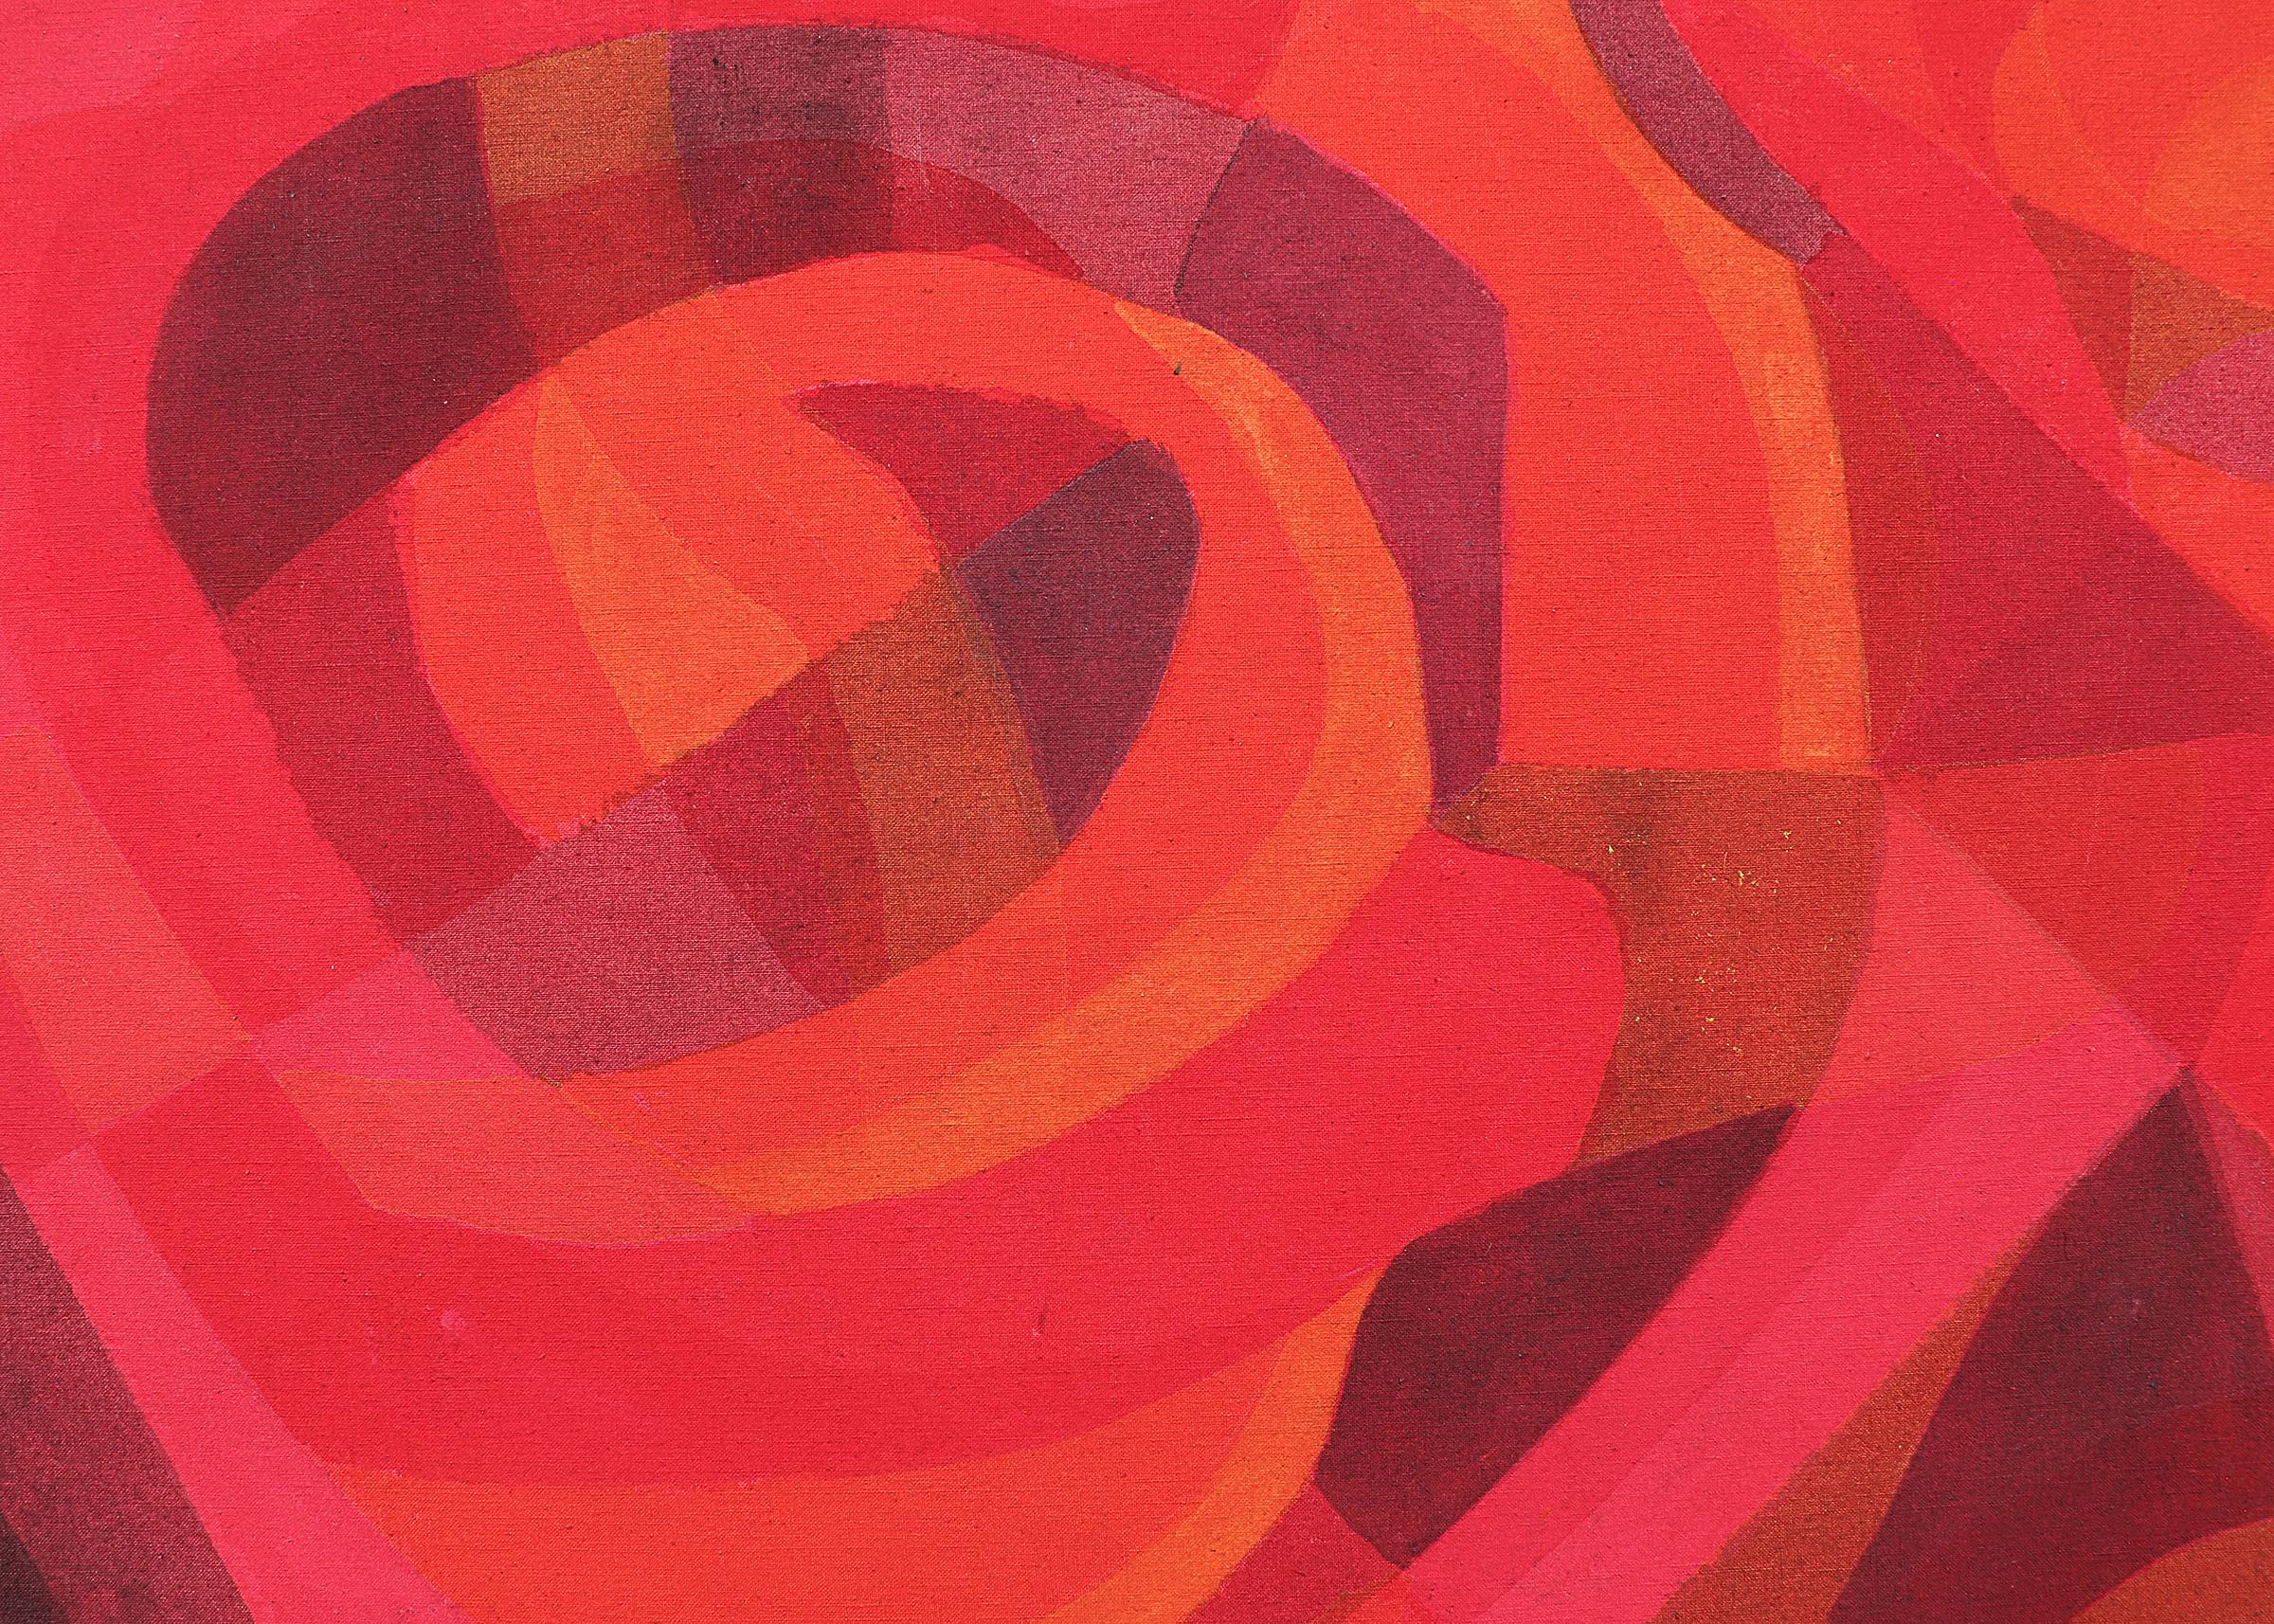 Abstract acrylic painting in shades of red and orange painted in 1988 and signed by Margo Hoff (1910-2008). Wrapped canvas edges are ready for hanging, measuring 48 x 48 inches. 

Provenance: Estate of the artist, Margo Hoff

Painting is in good